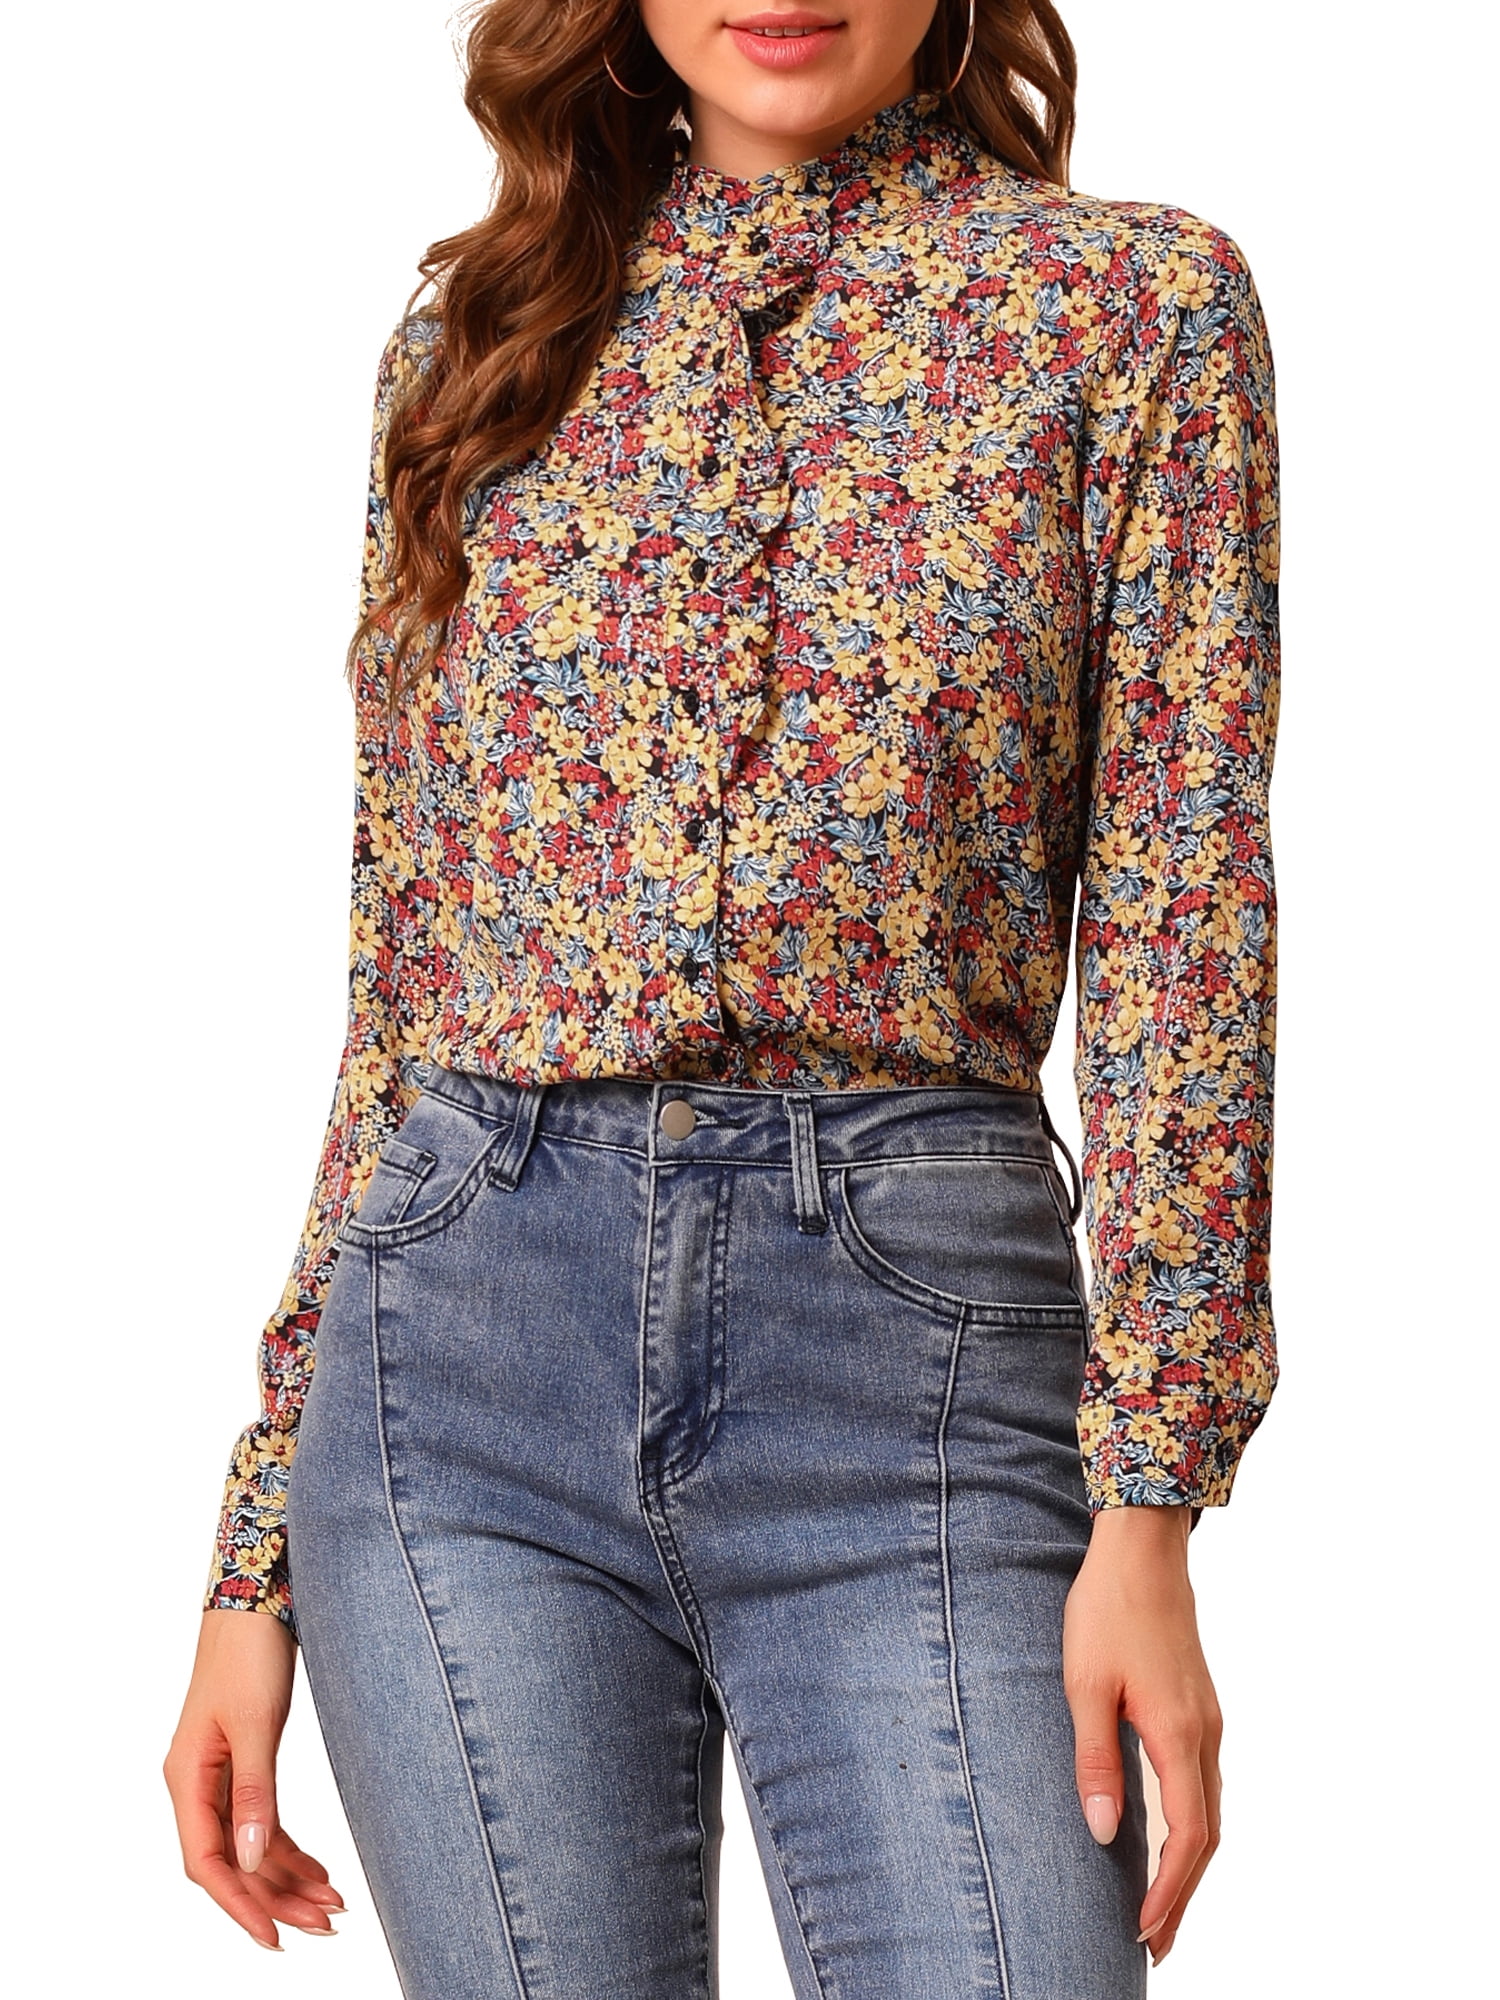 Allegra K Womens Floral Blouse V Neck Stand Collar Long Sleeve Loose Top 